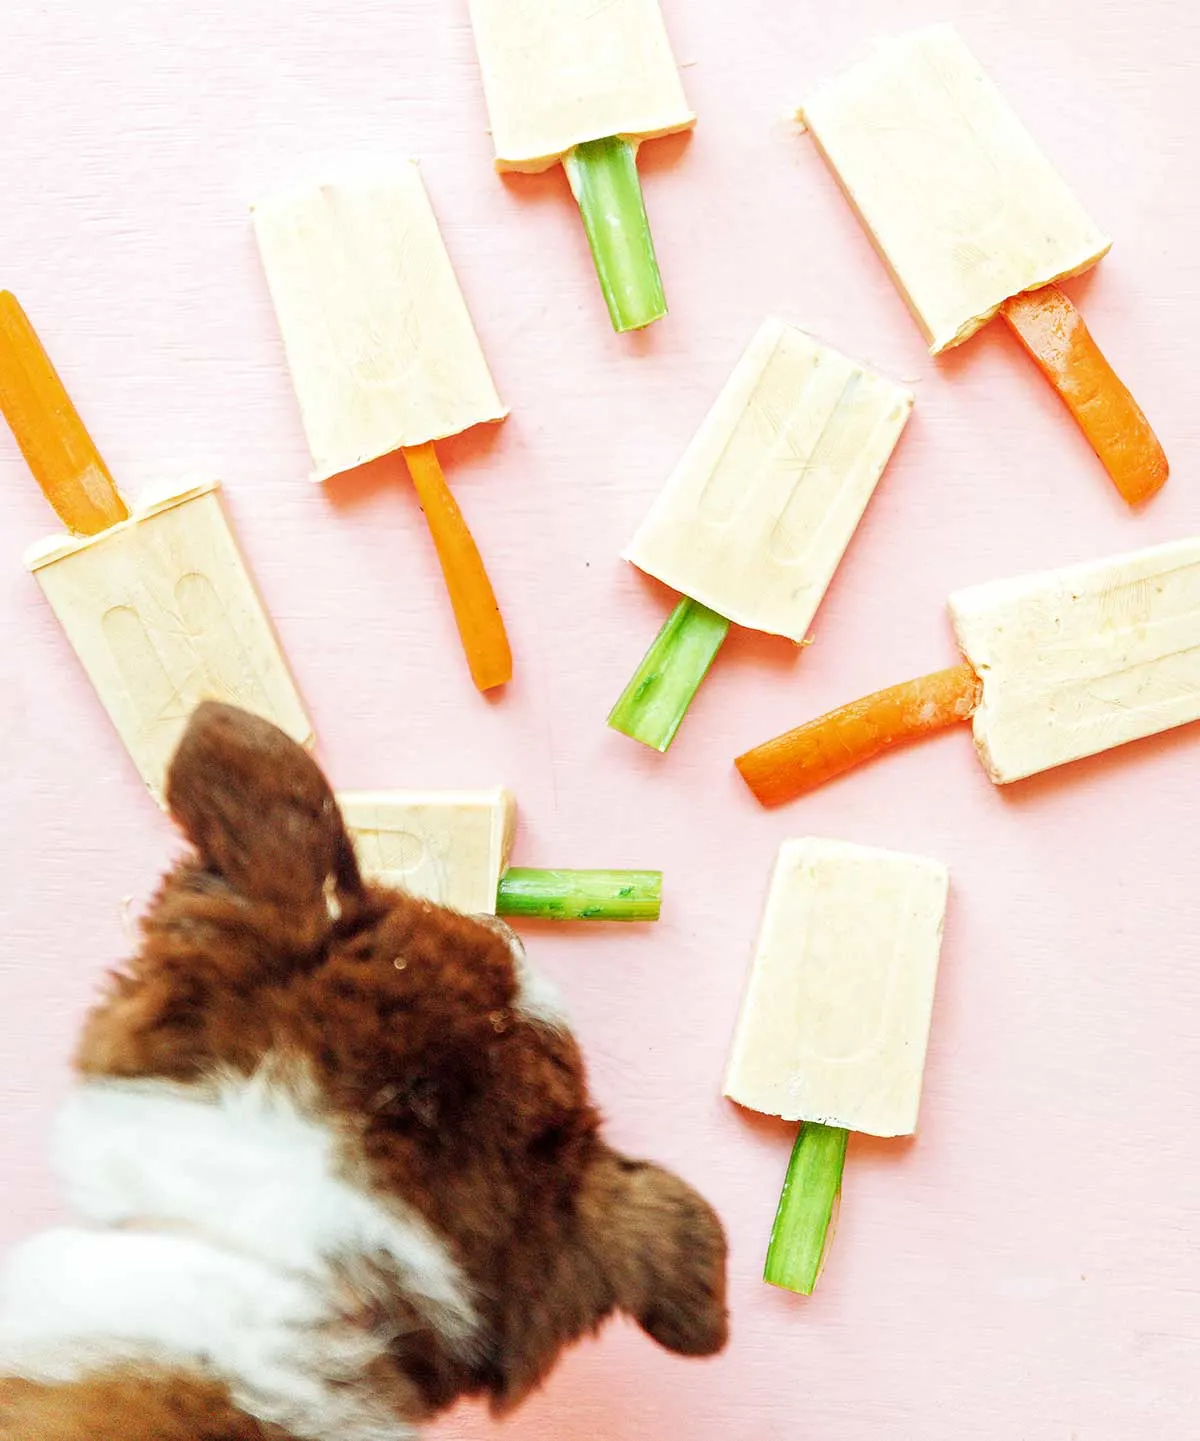 Overhead shot of pupsicles using carrots and celery for popsicle sticks